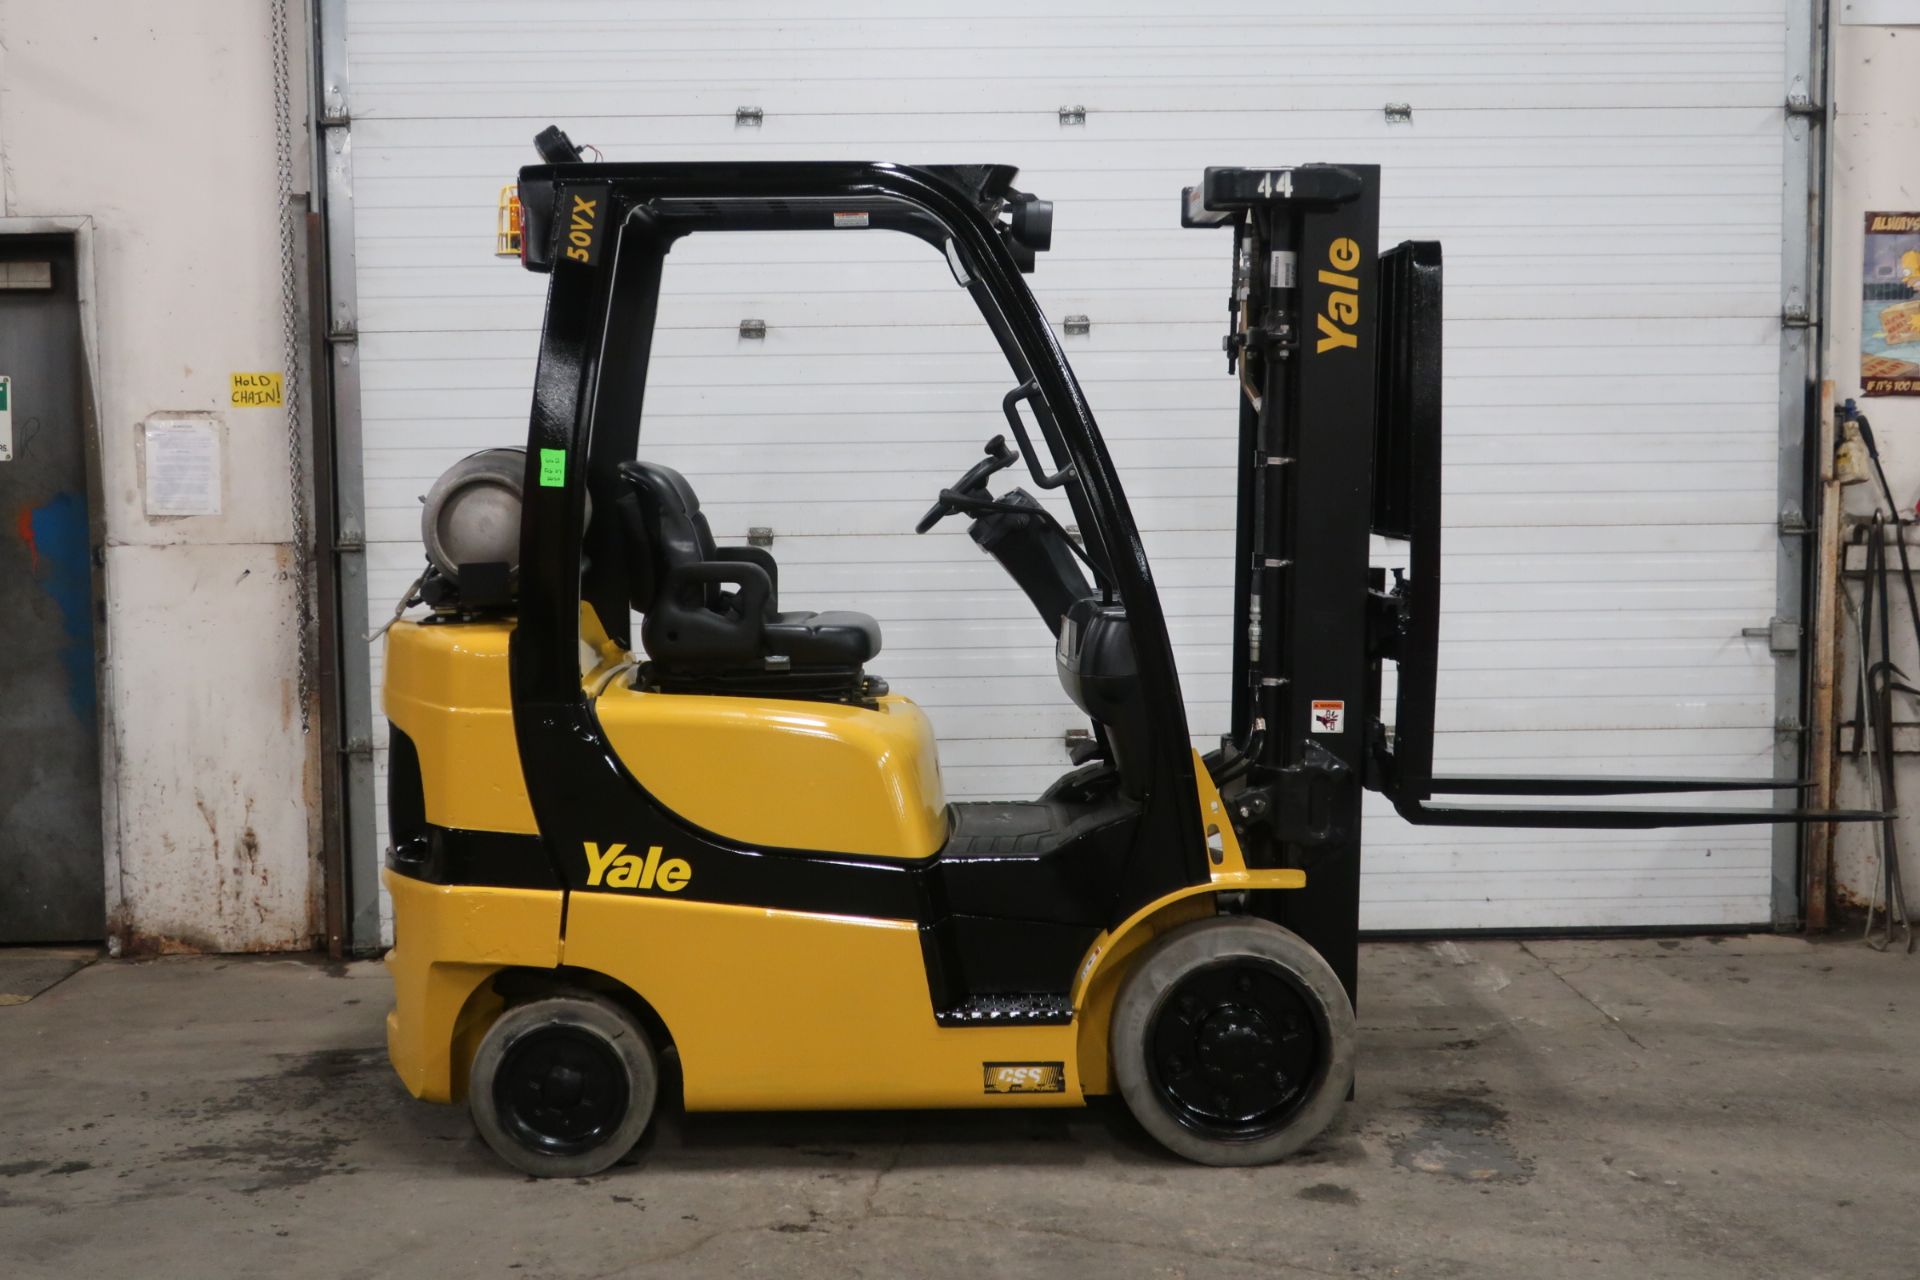 FREE CUSTOMS - 2013 Yale 5000lbs Capacity Forklift with 3-stage mast - LPG (propane) with